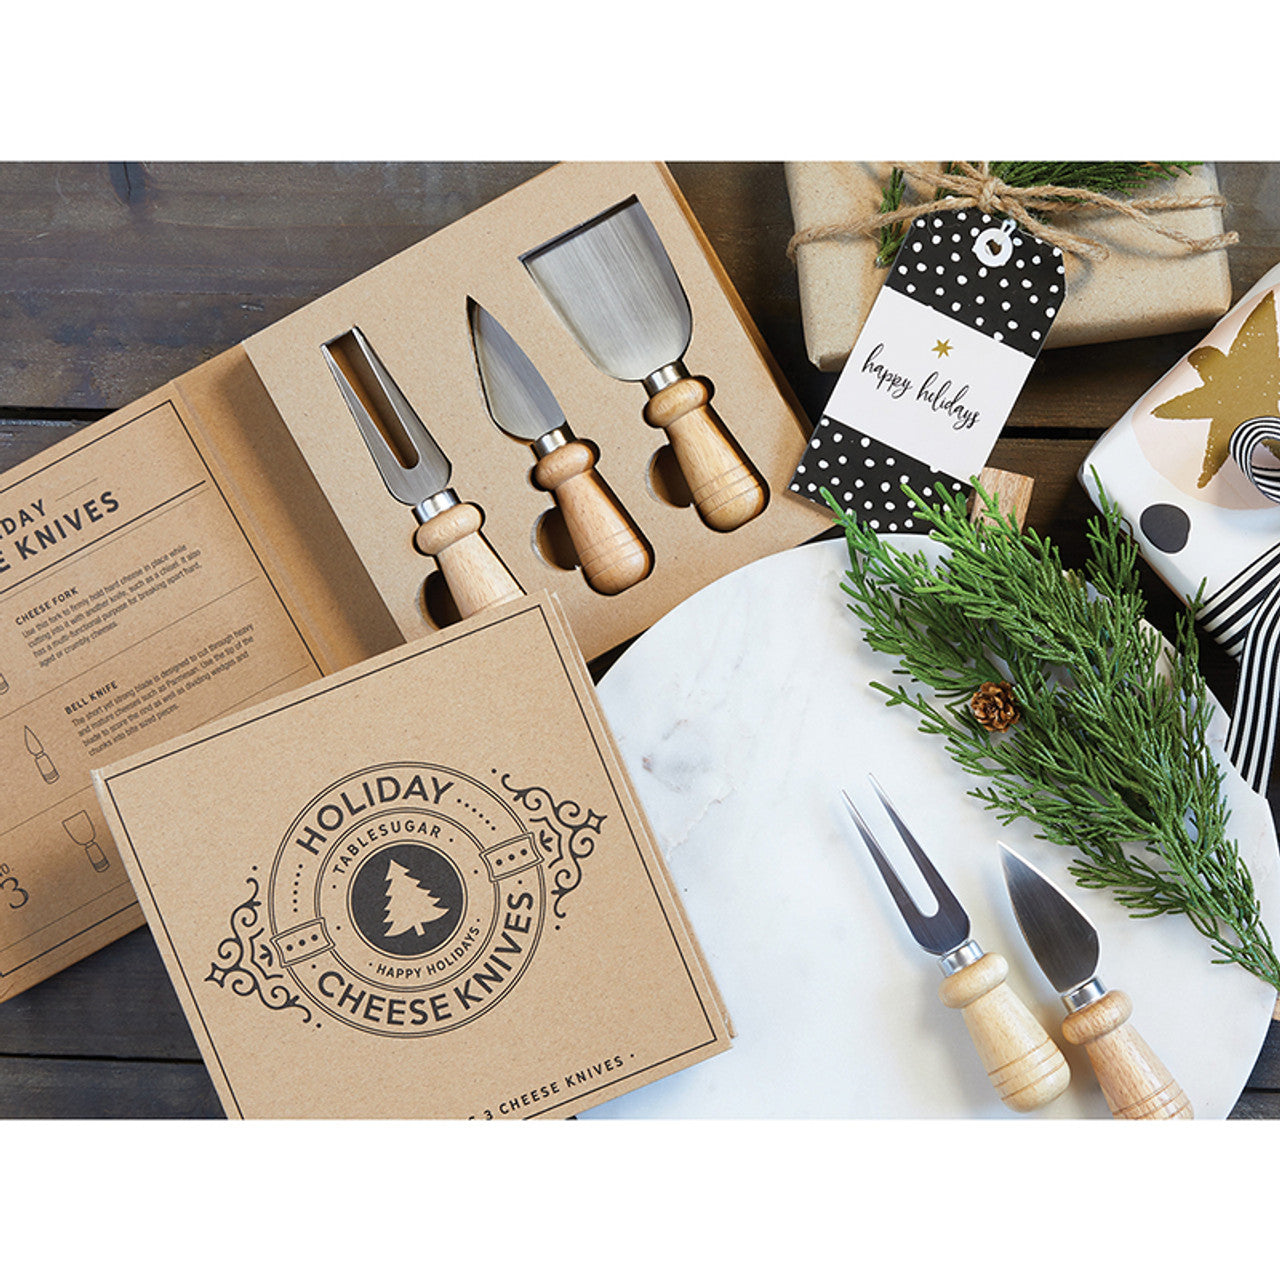 Holiday Cheese Knives - Set includes: Cheese Fork, Bell Knife, Chisel Knife, and cardboard gift box